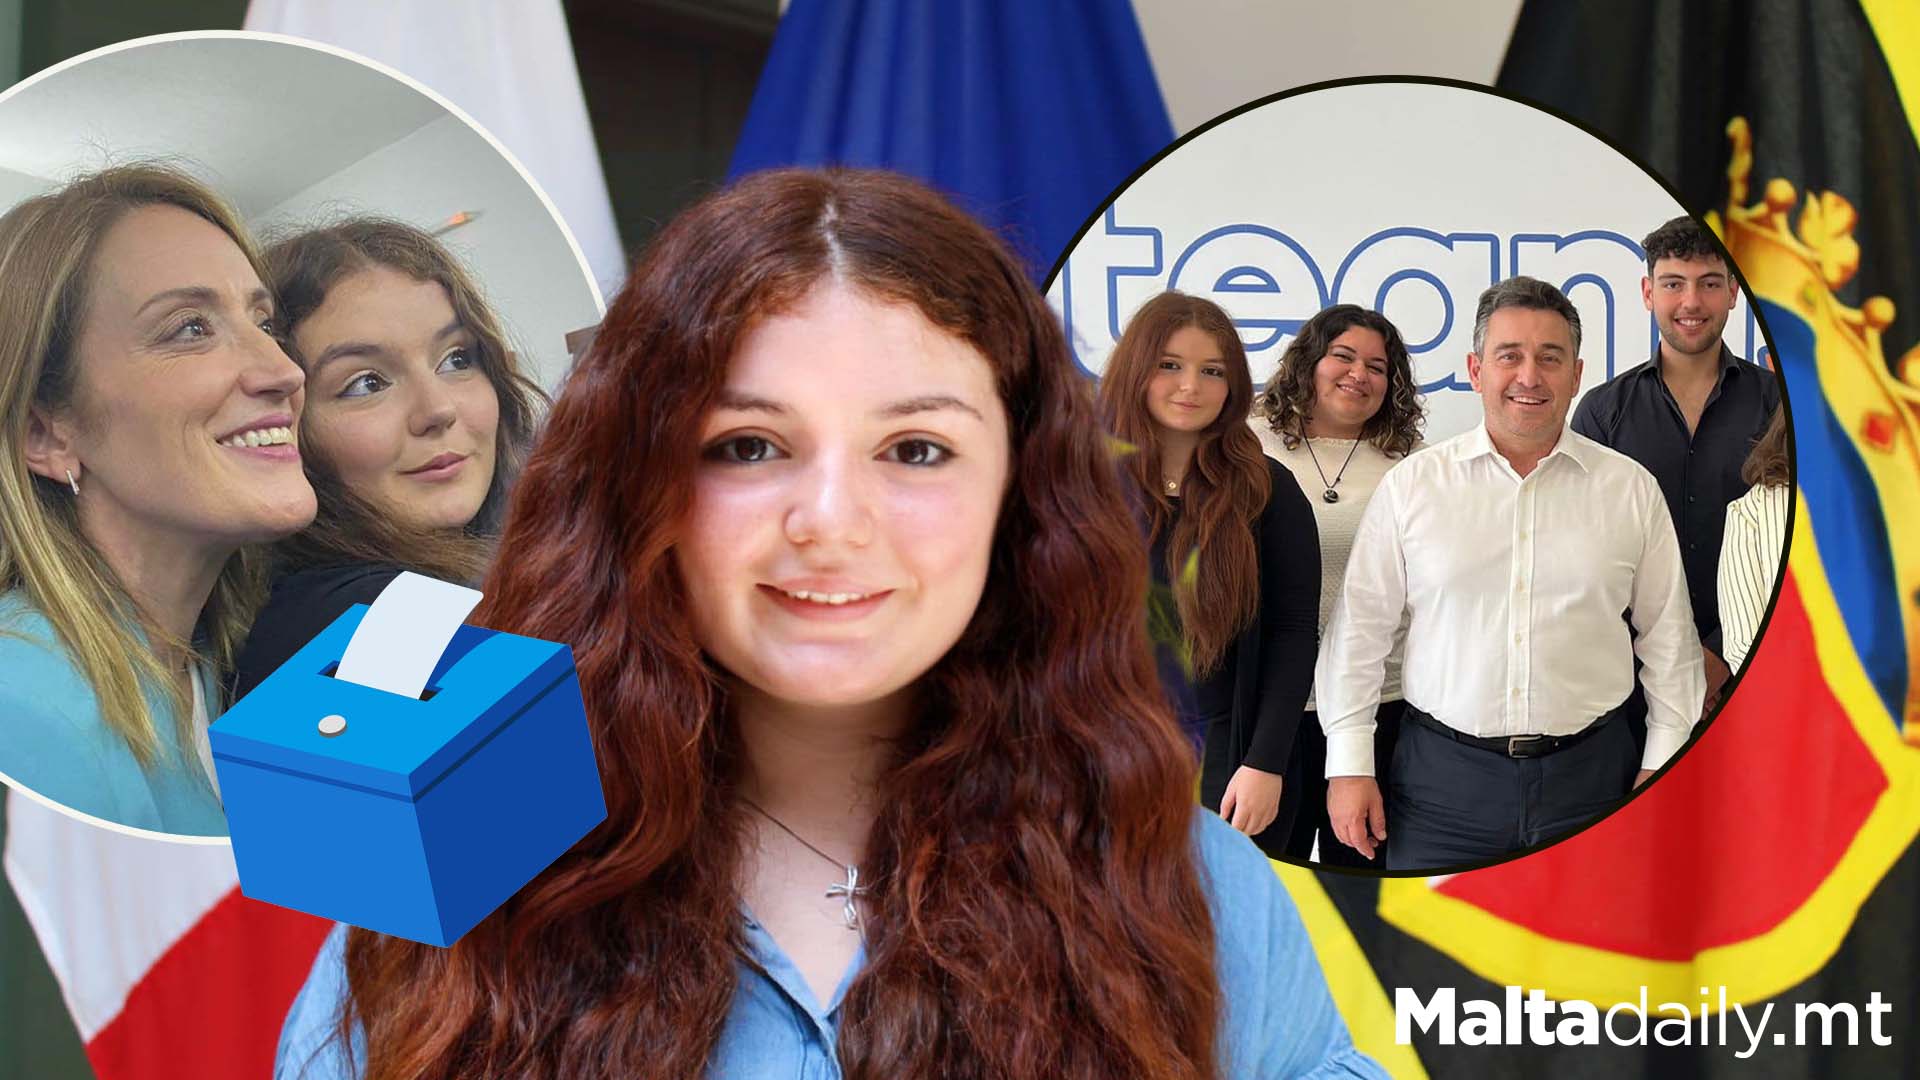 16 Year Old Nina Briffa To Run For Local Council Elections